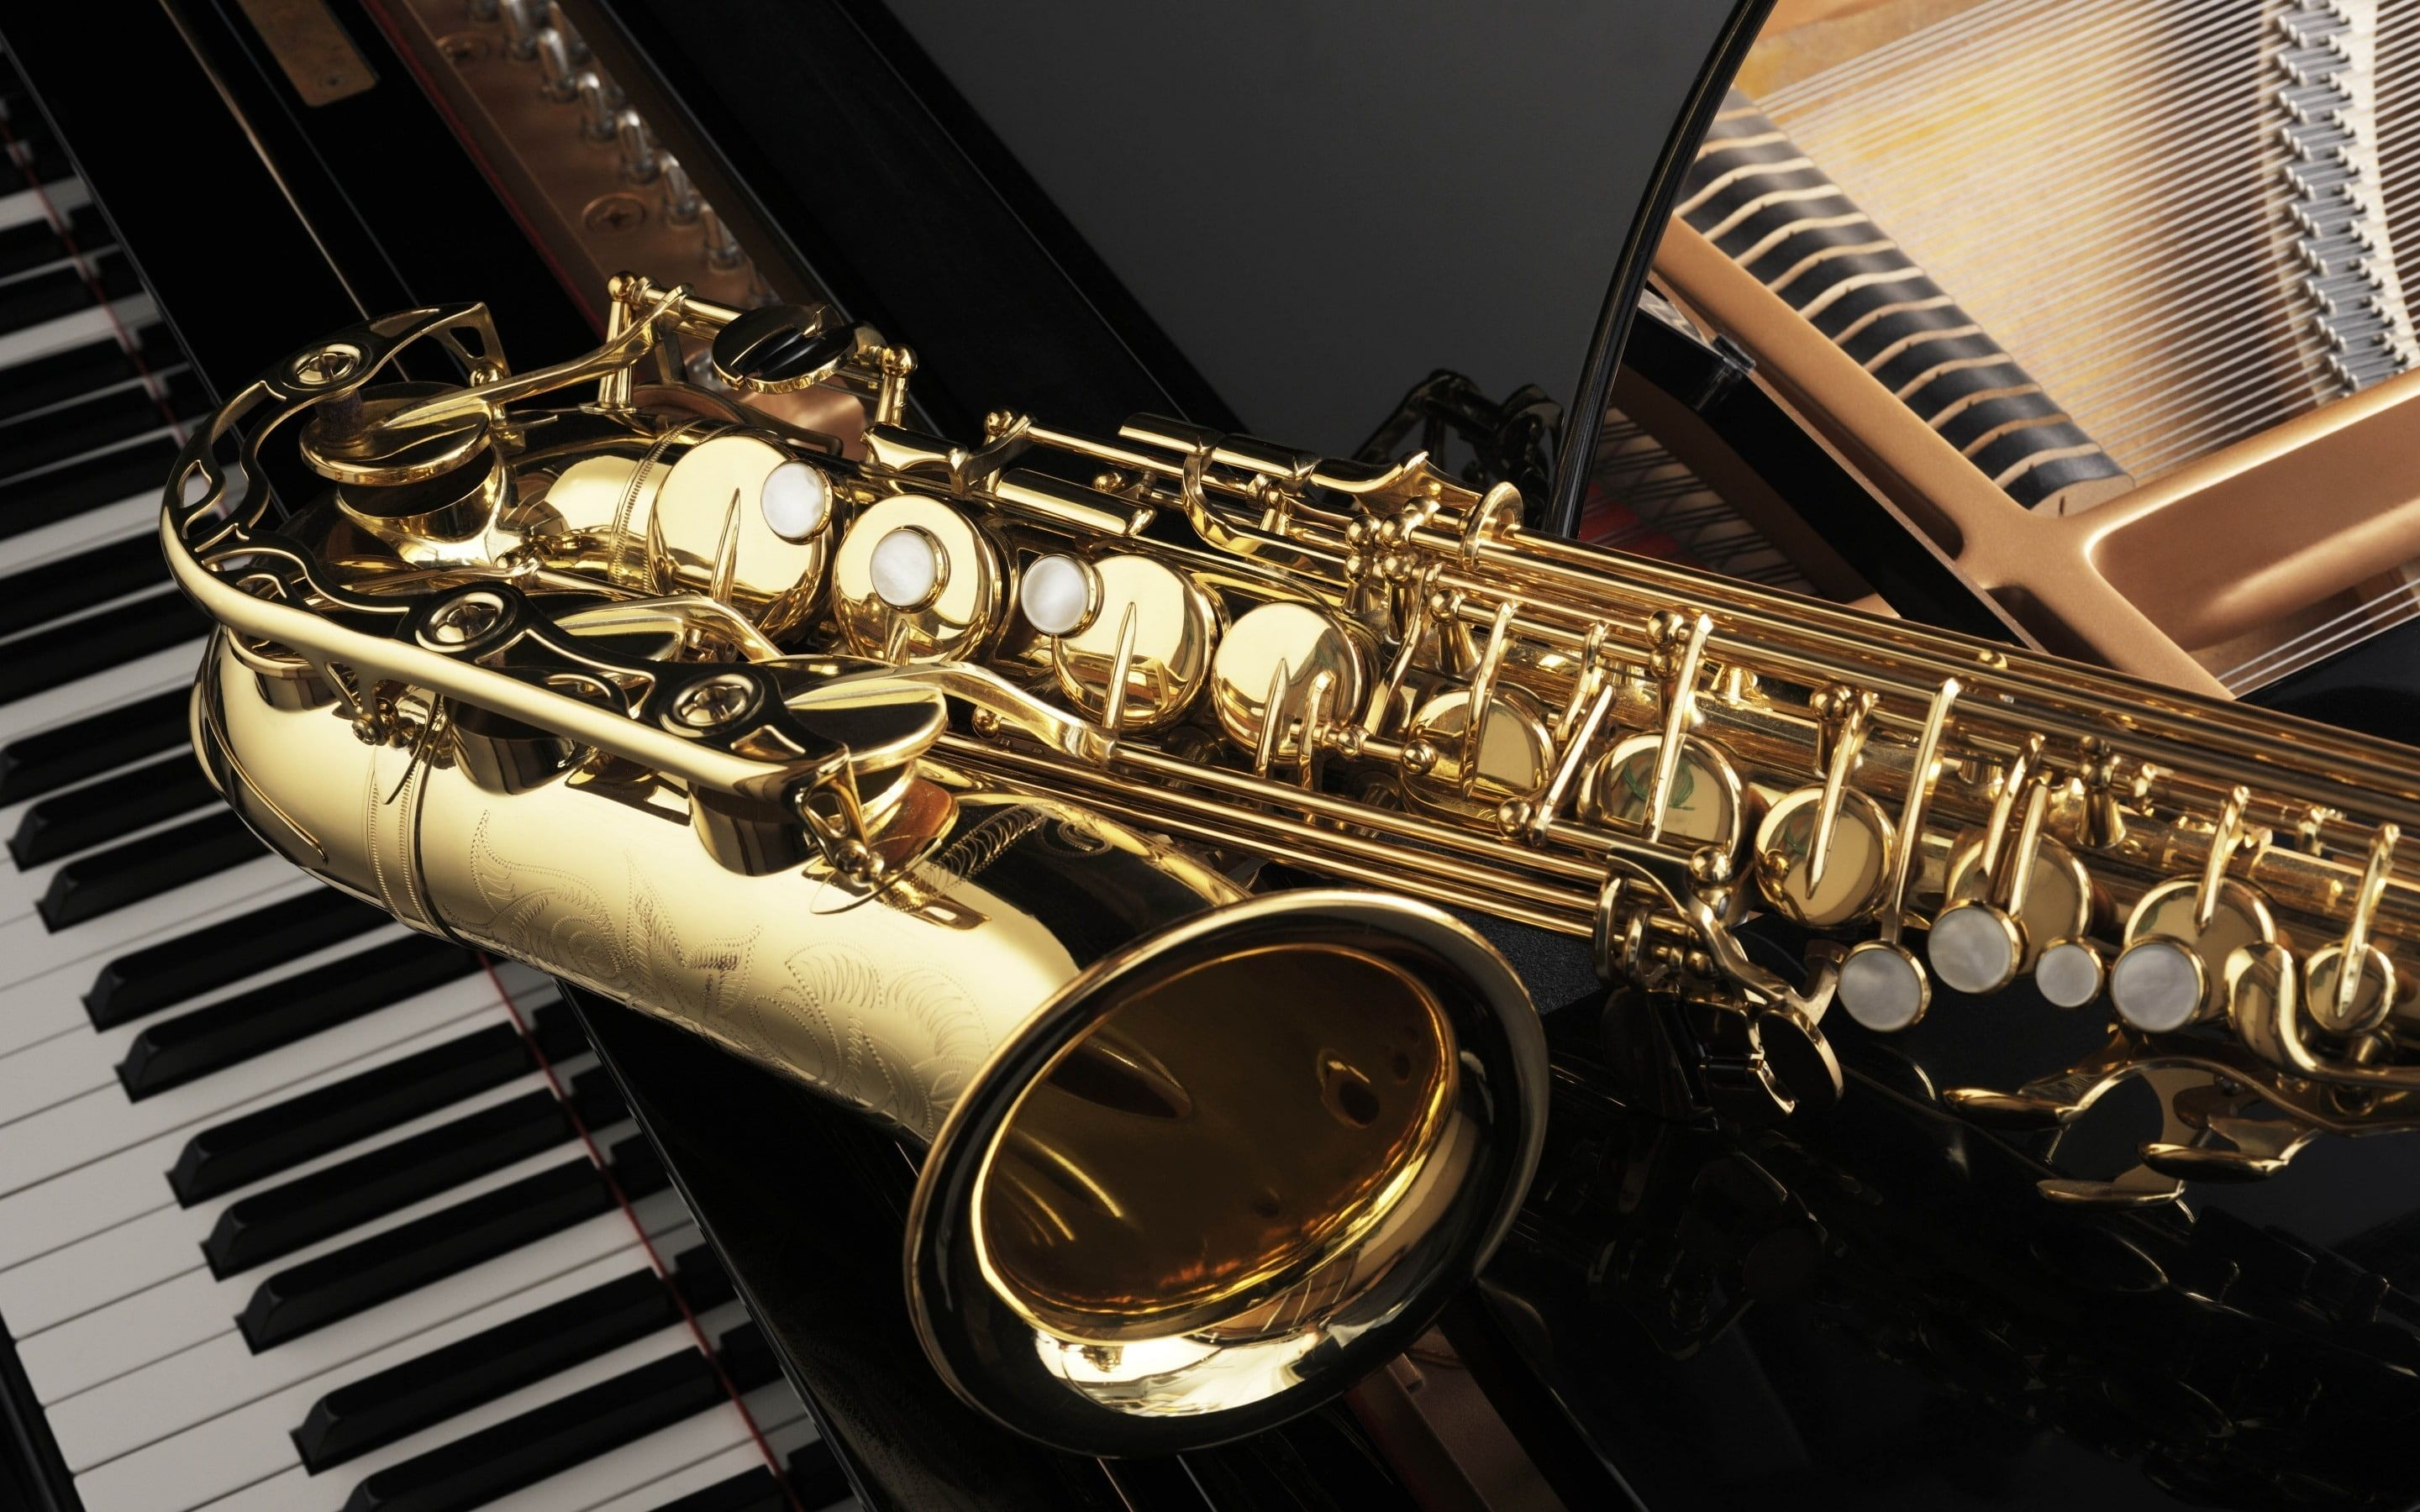 2880x1800 Saxophone and Piano, brass saxophone #saxophone #piano musical instruments #music #2K #wallpaper #hdwallpaper #desktop | Saxophone, Musicals, Music lessons